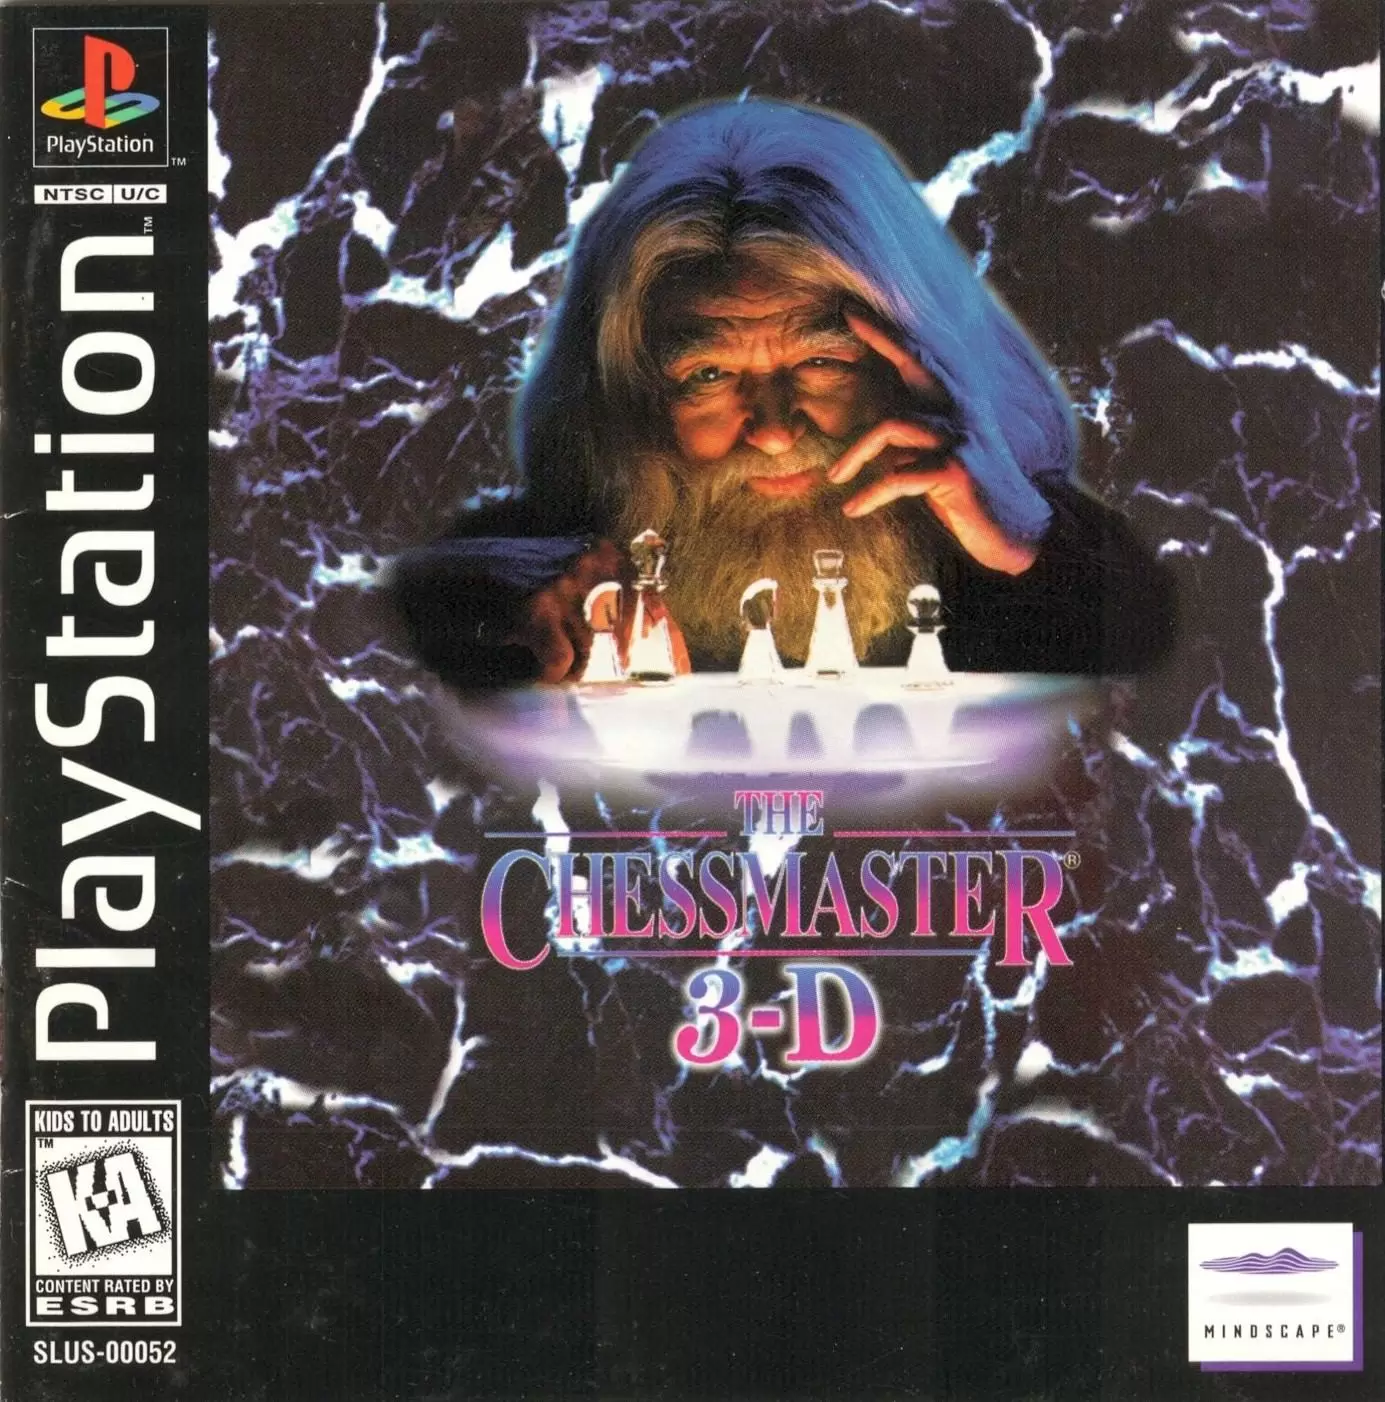 Playstation games - The Chessmaster 3-D